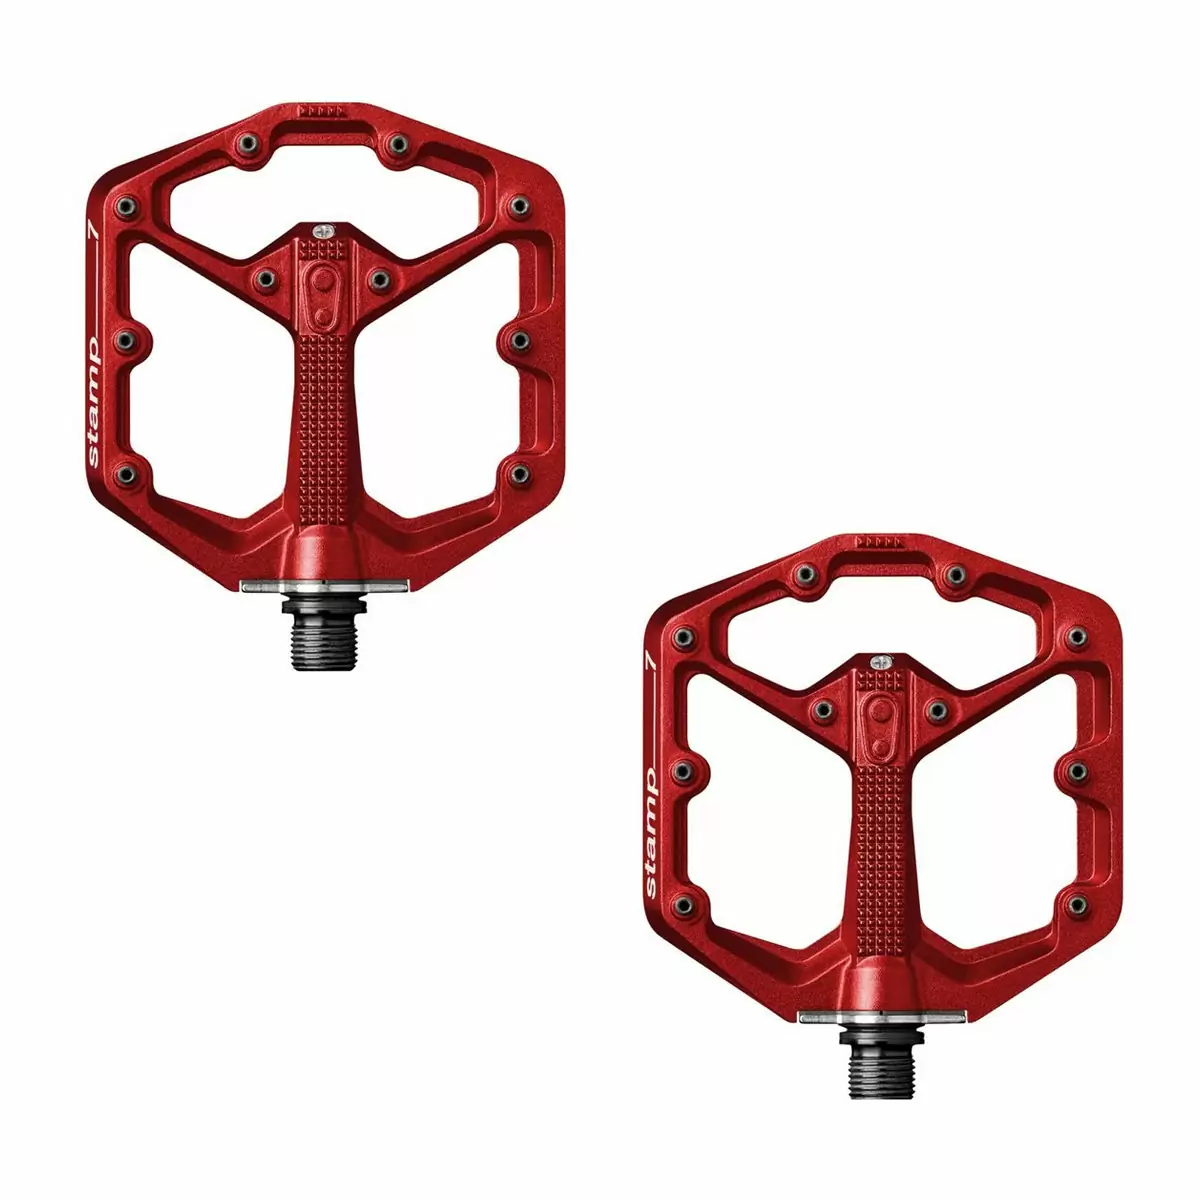 Pair of pedals Stamp 7 Large red - image